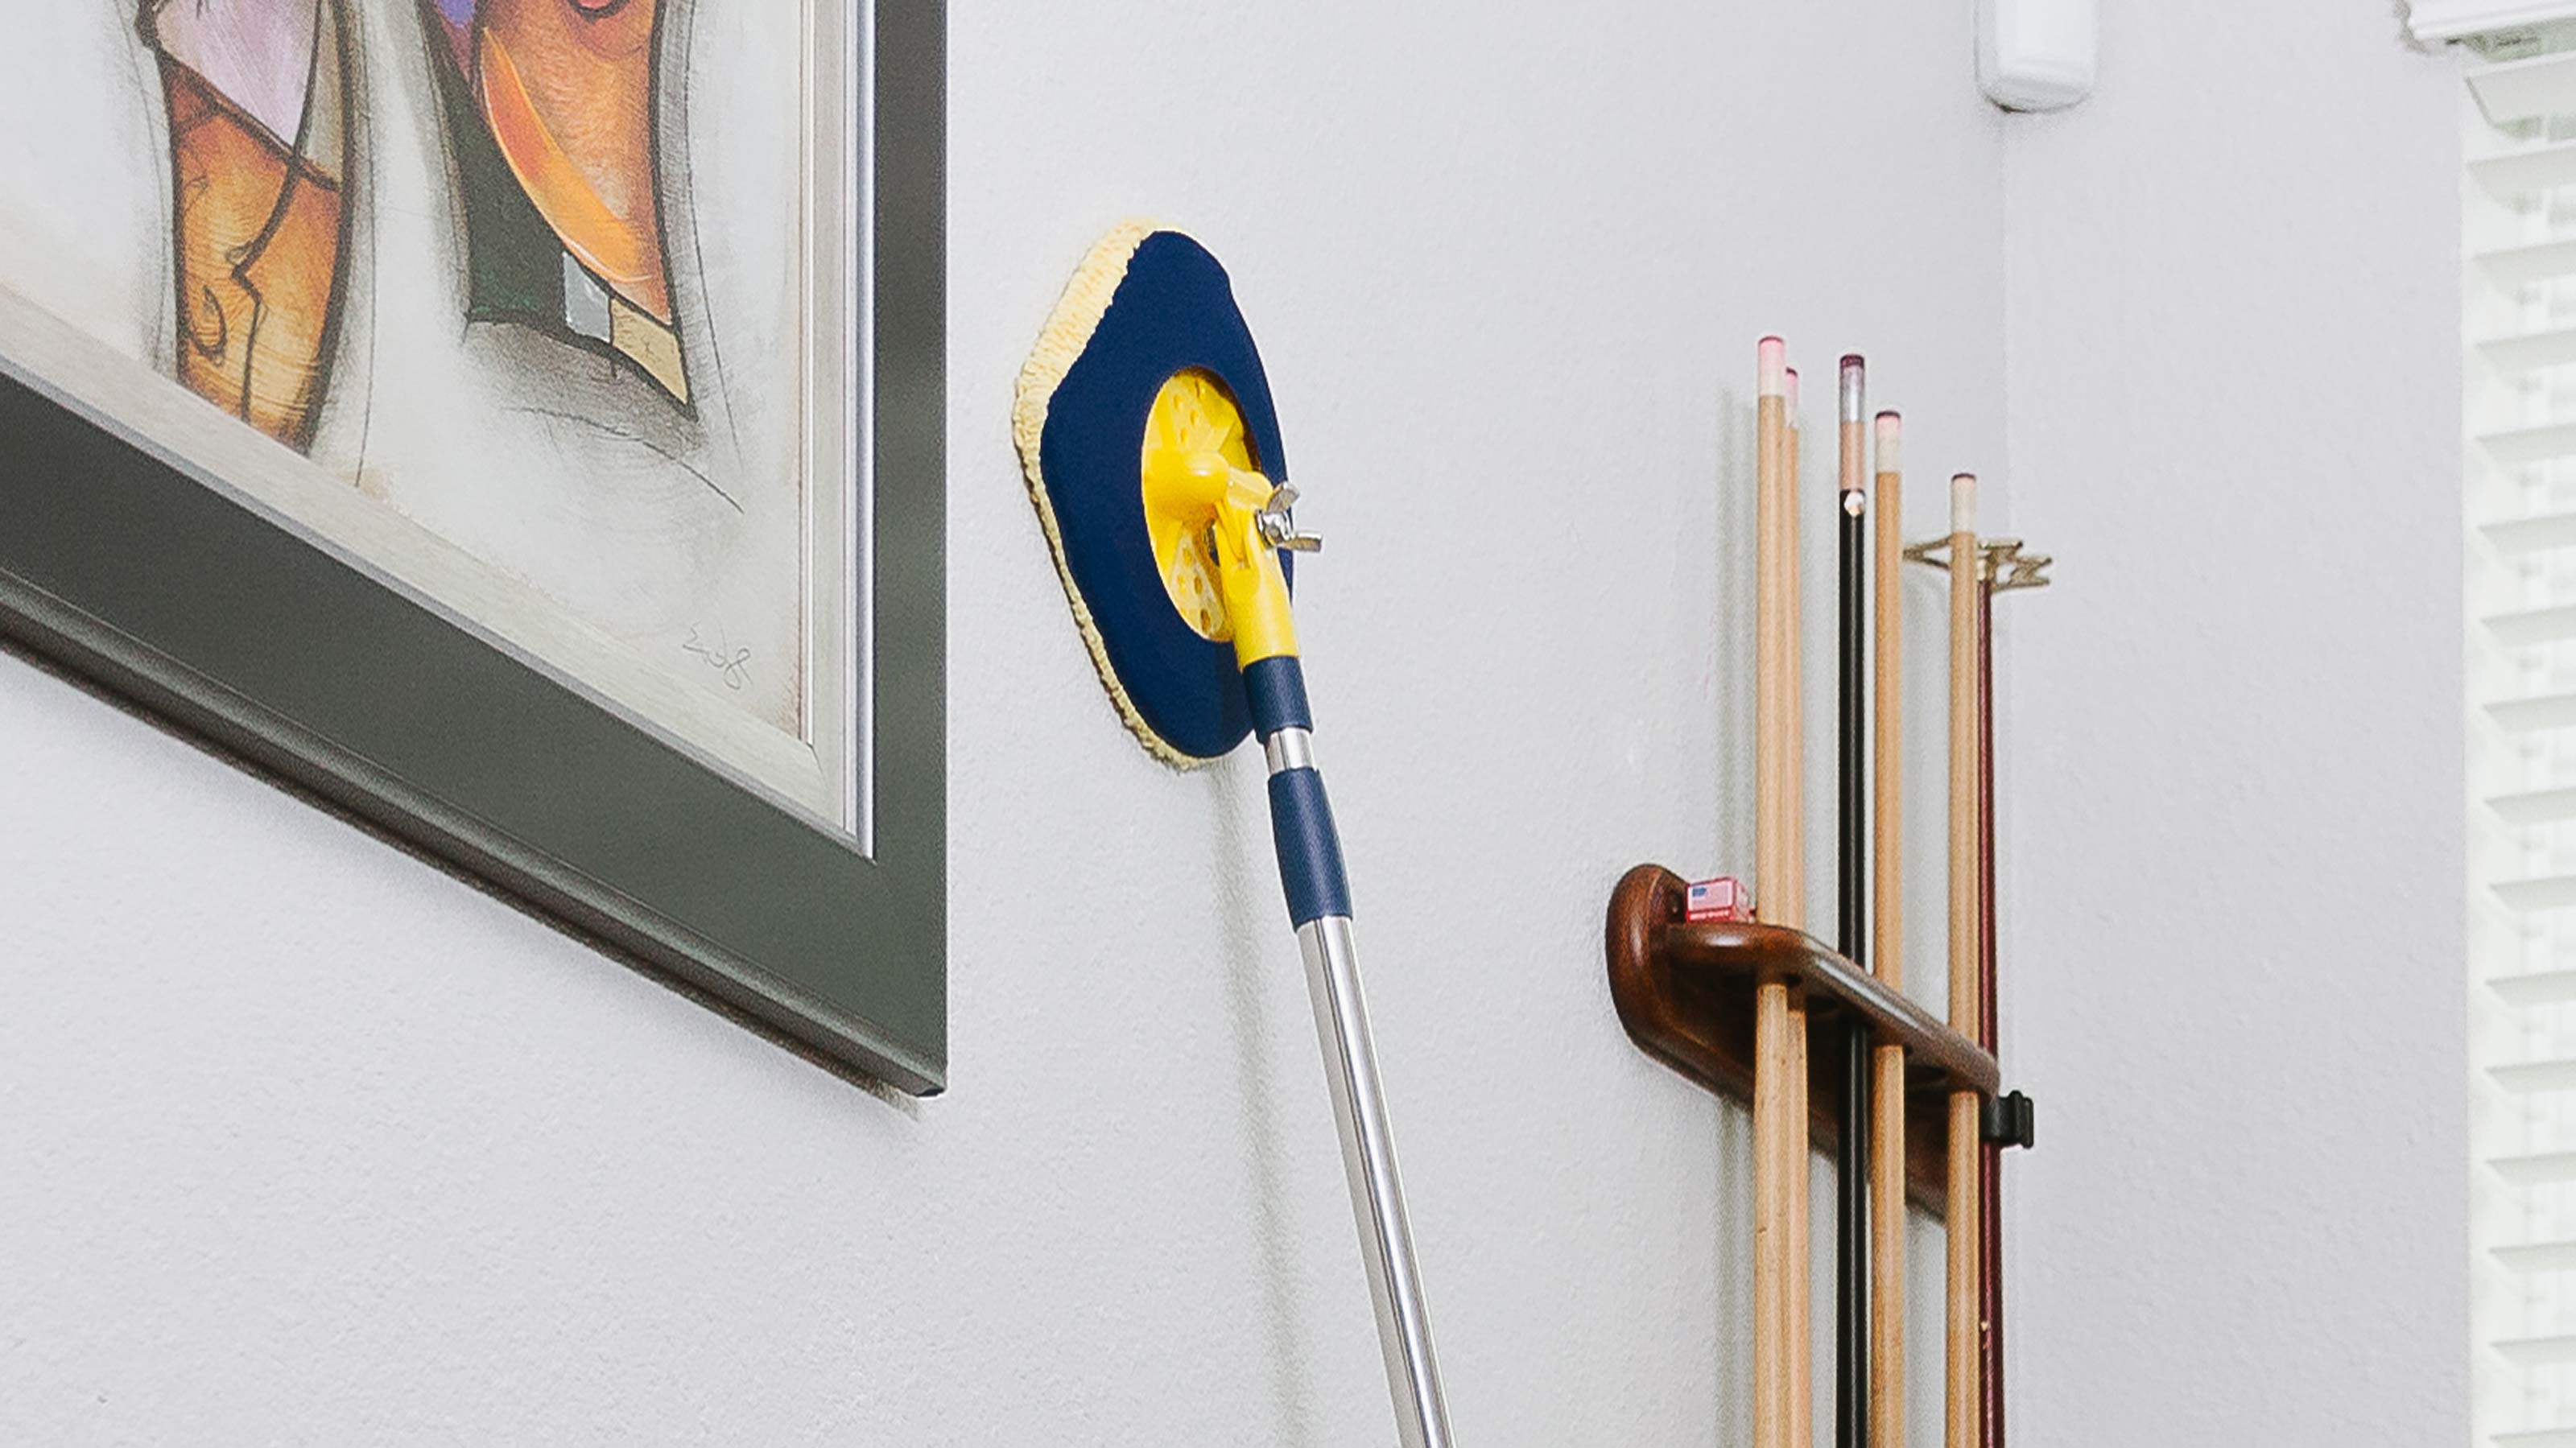 Where to buy the Chomp Wall Mop that went viral on TikTok